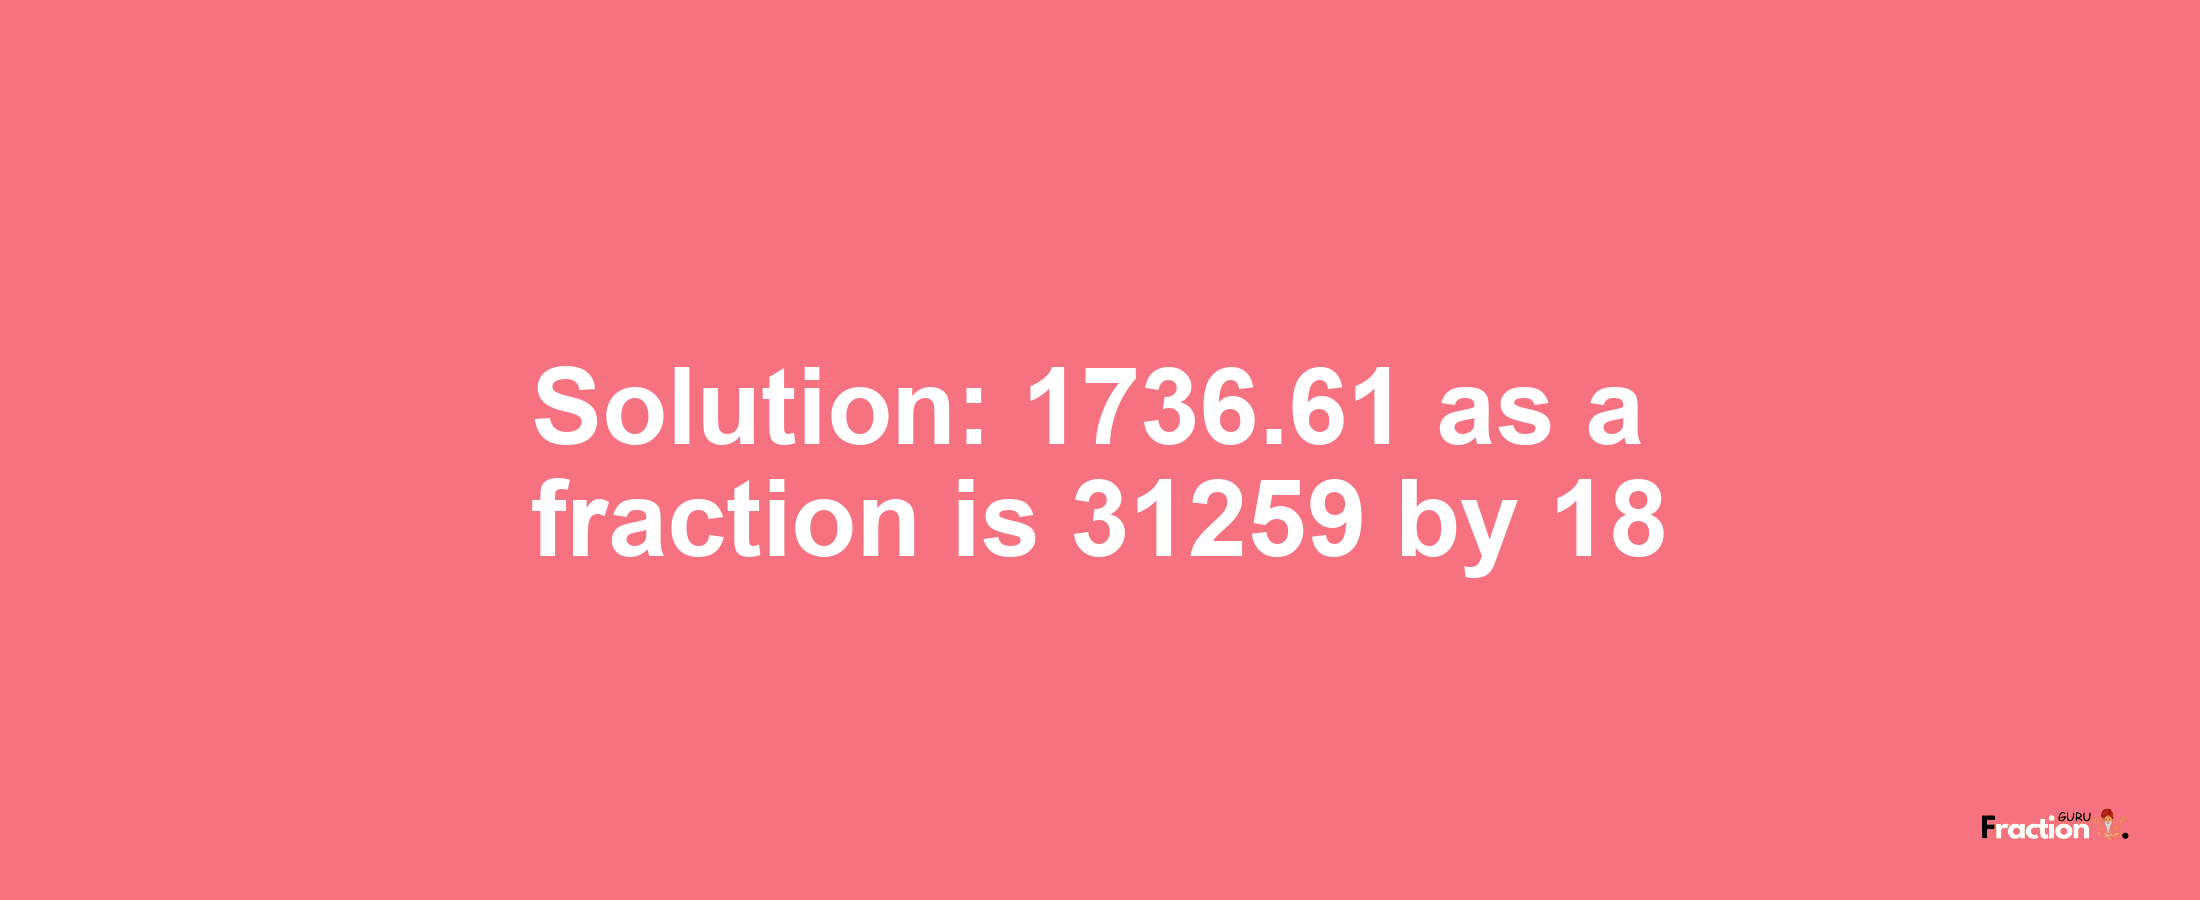 Solution:1736.61 as a fraction is 31259/18